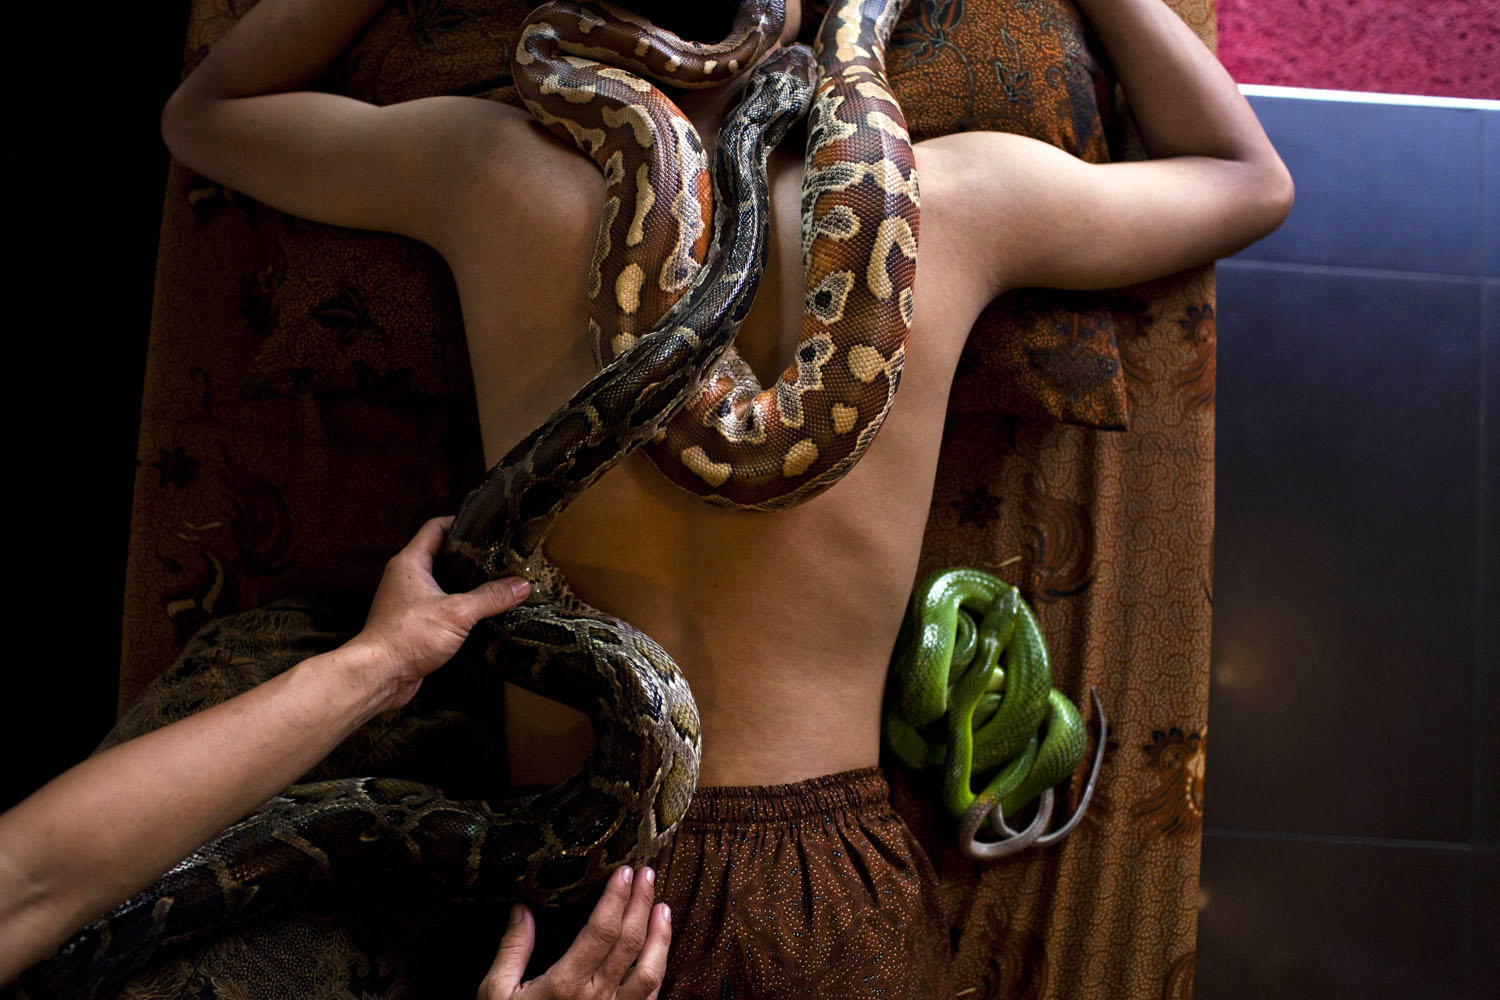 Oct. 27, 2013. A members of staff demonstrates a form of massage using pythons at Bali Heritage Reflexology and Spa, in Jakarta, Indonesia.